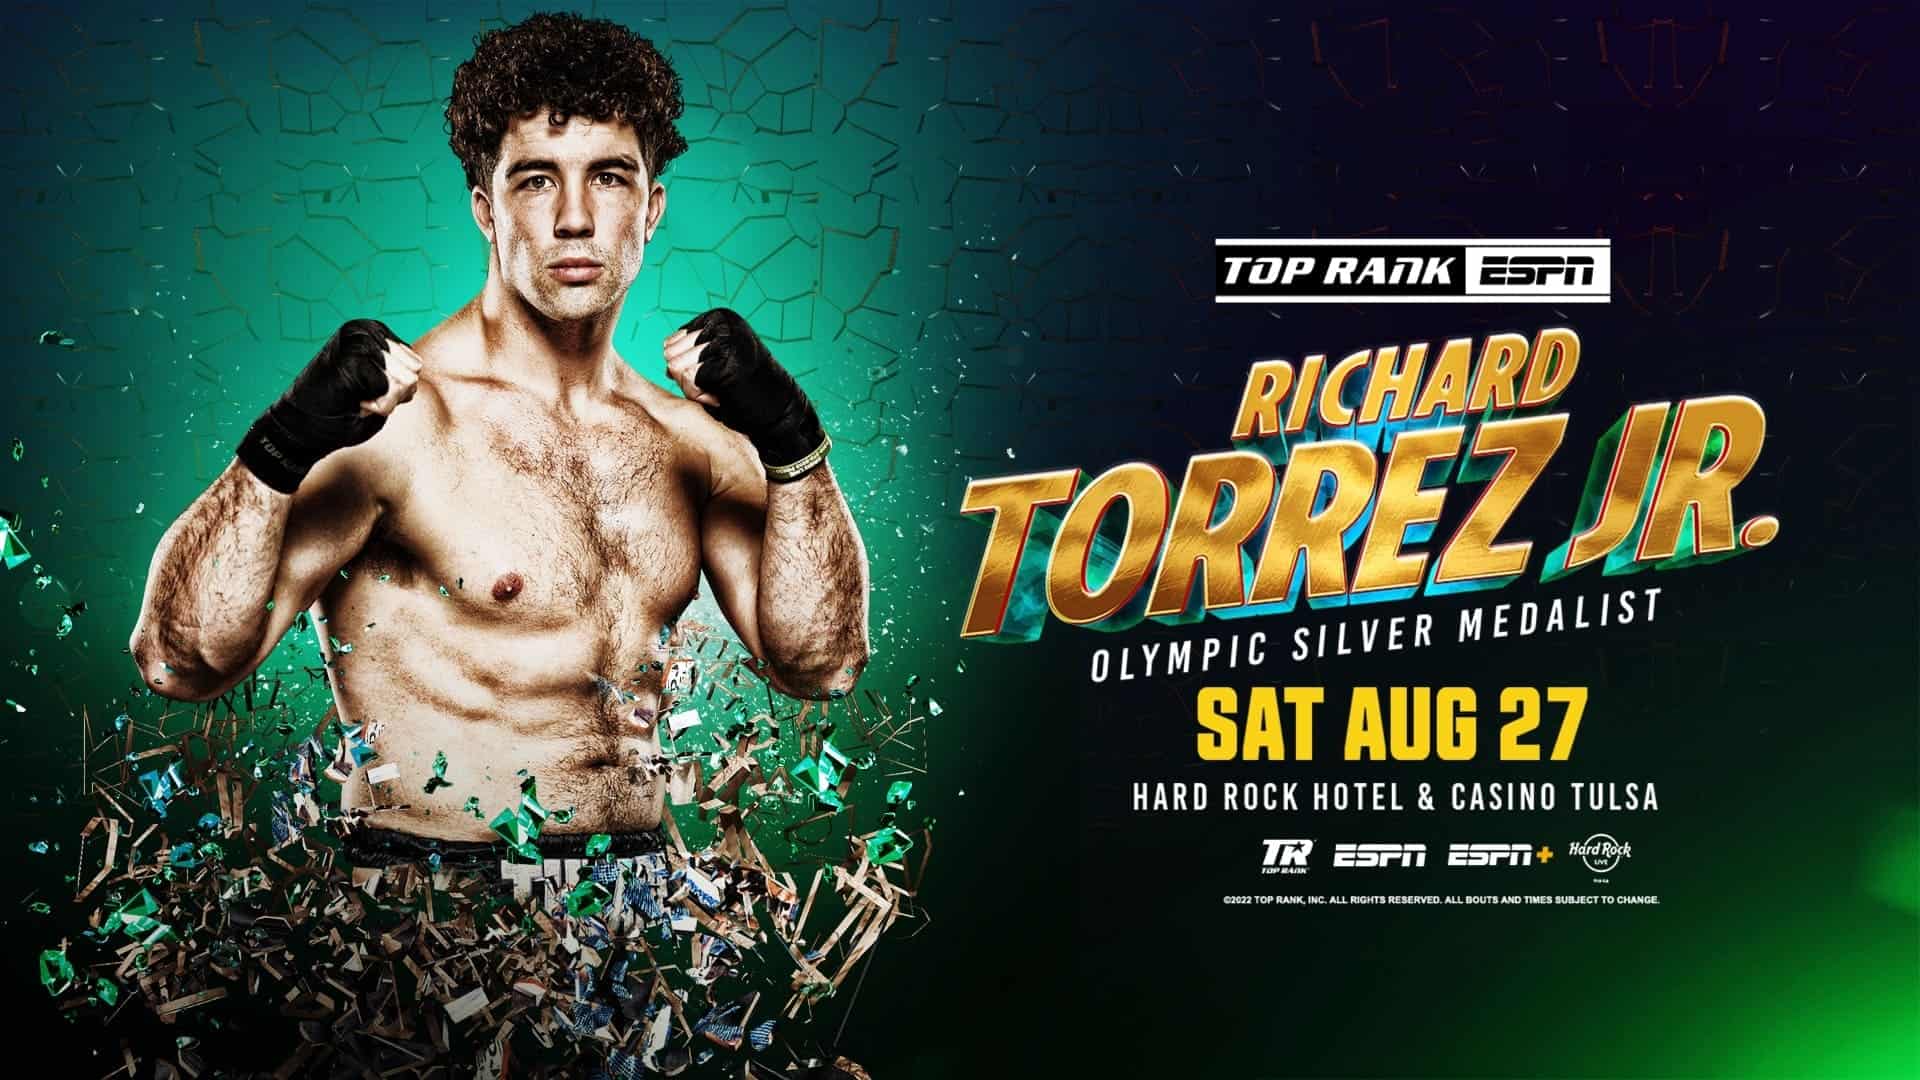 Torrez Jr. hands Jake Jr. a beatdown, and Vargas raised the roof as 2 Top  Rank